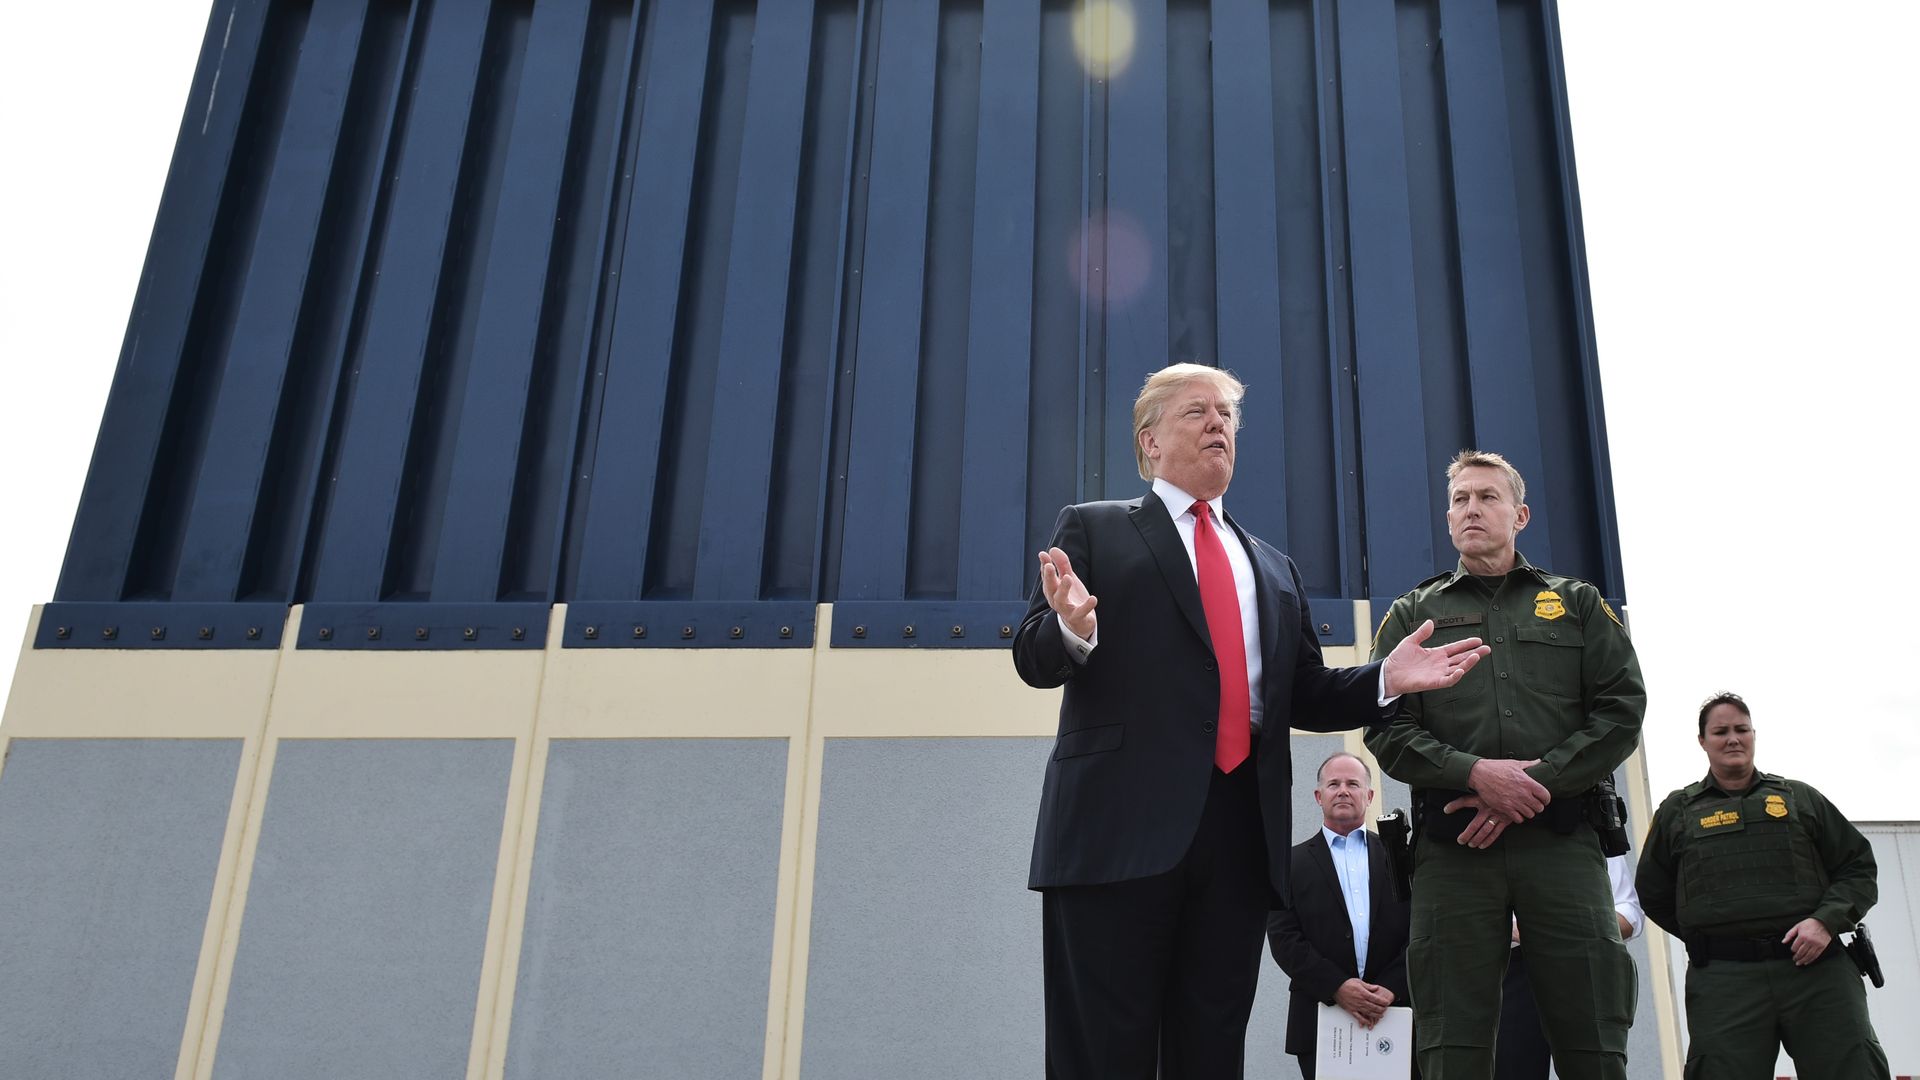 Trump stands in front of border wall prototype with law enforcement officers in green behind him